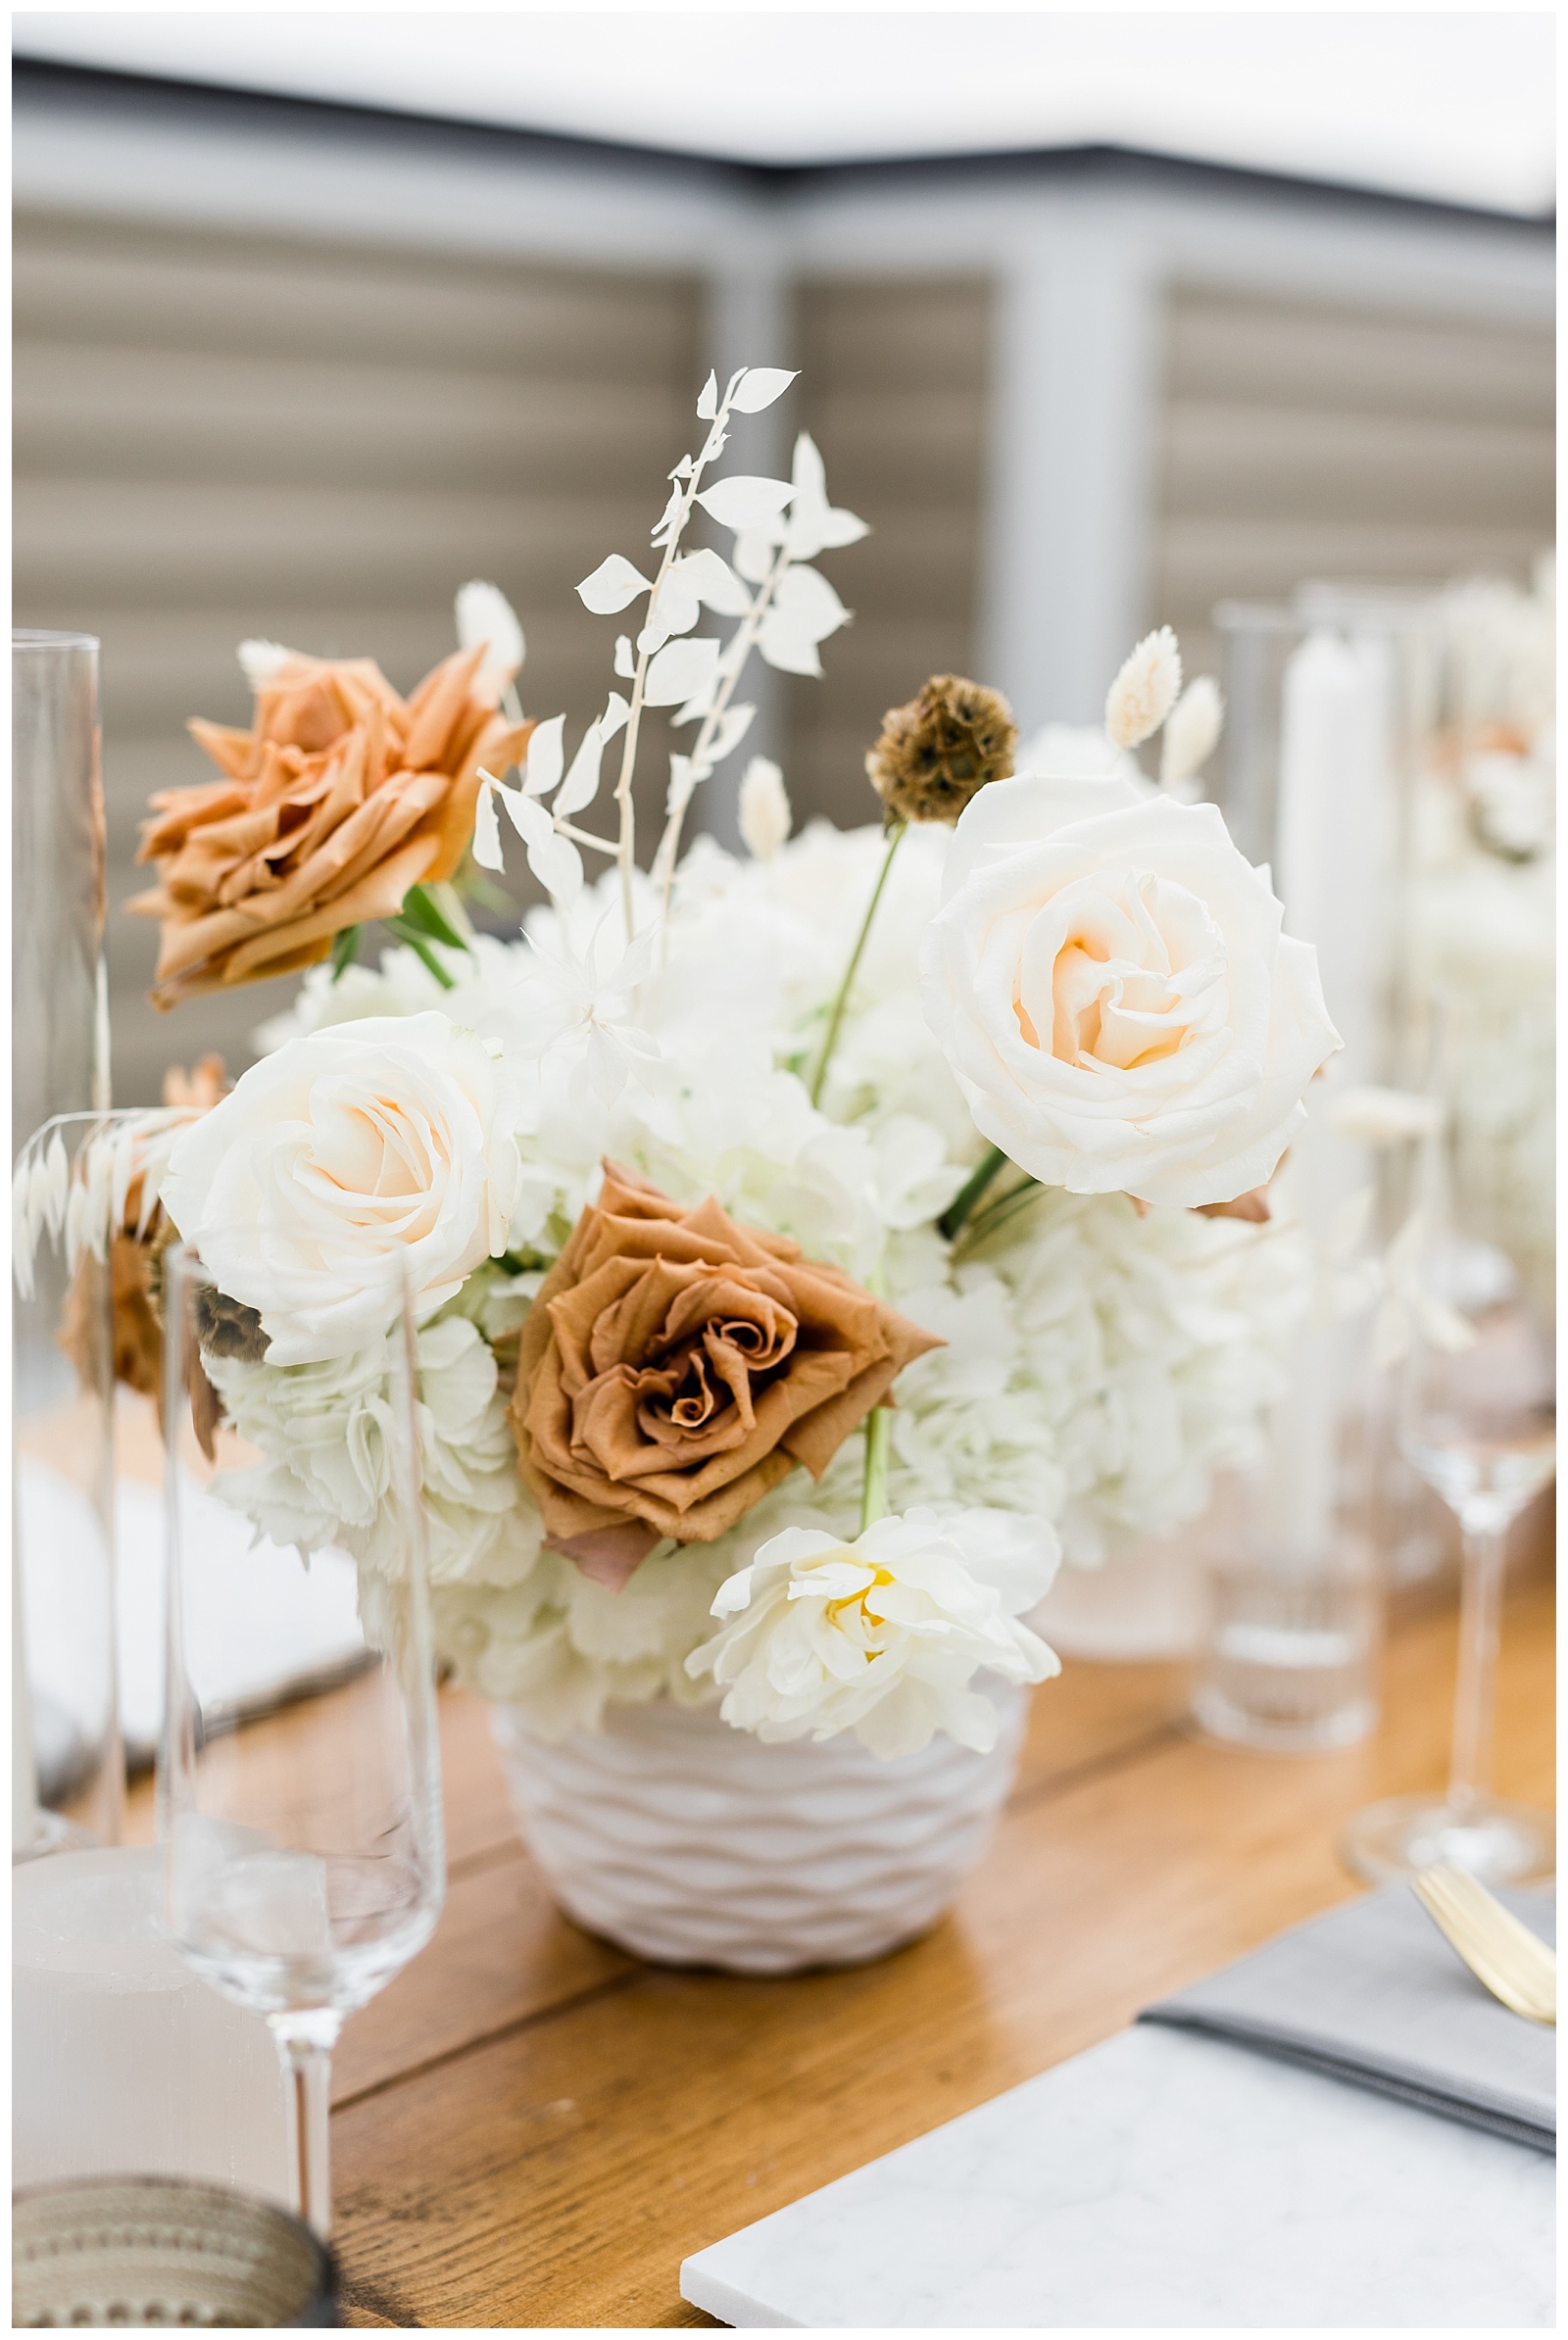 5 reasons to hire a wedding planner Michael and Jasmine Photography